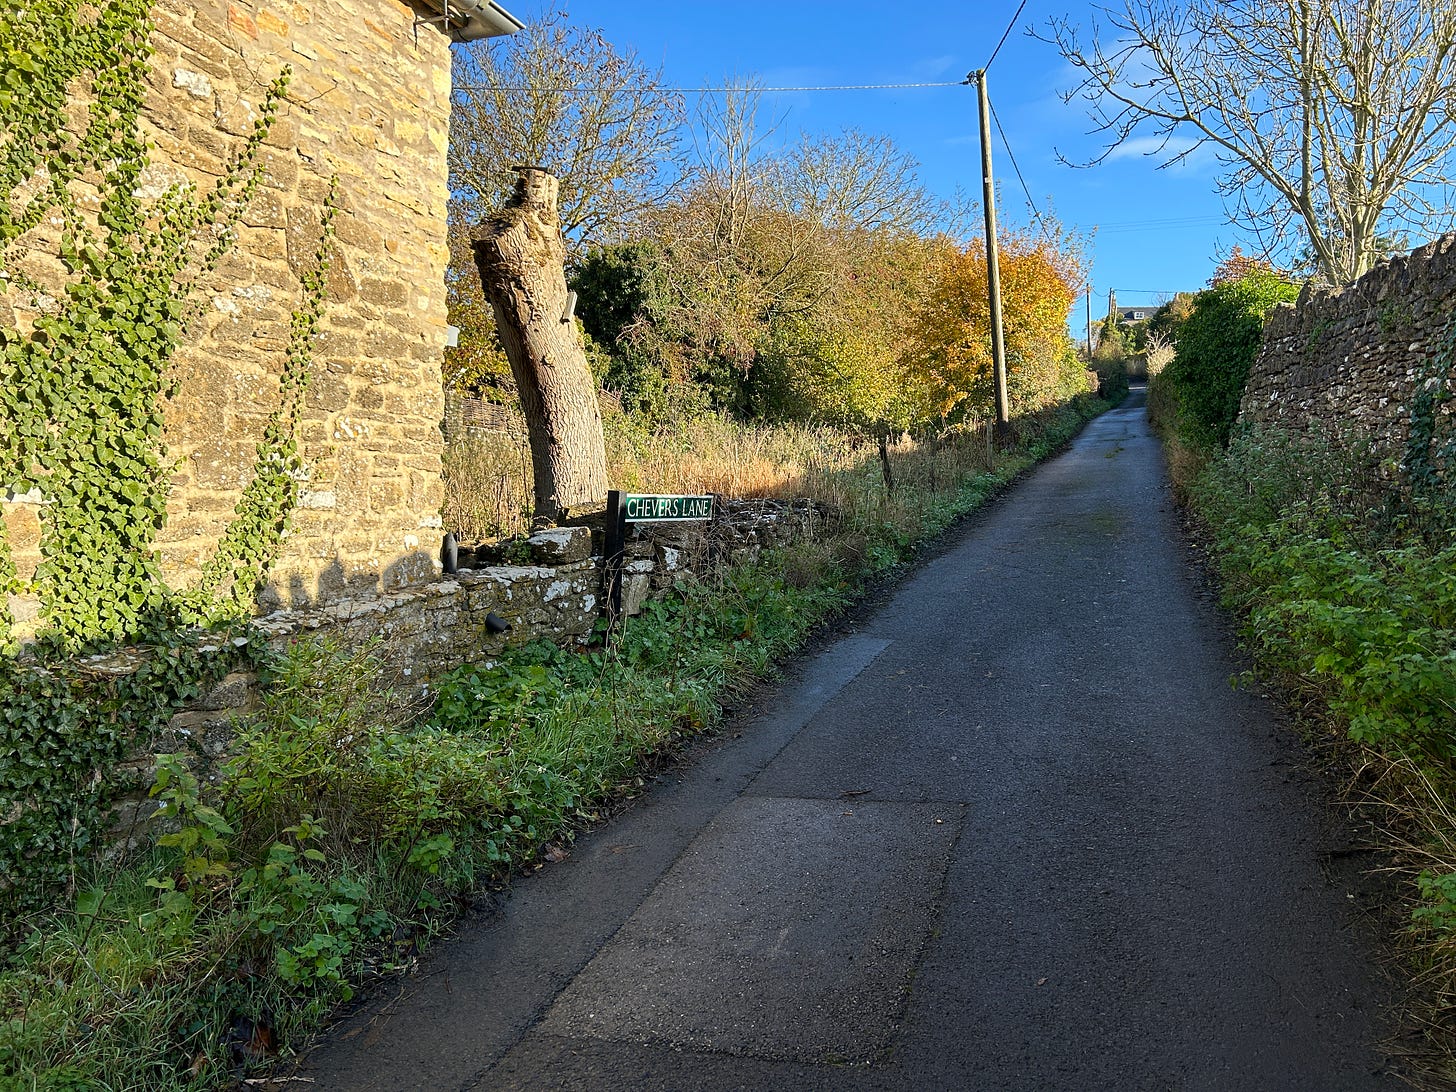 This is Chevers Lane, Norton St. Philip, Somerset. In 1685 at the top of this lane, a battle between Monmouth and Feversham occurred in the Pitchfork or Monmouth Rebellion. It is said much blood flowed down this lane, and therefore, the locals call it Bloody Lane. Image: Roland’s Travels